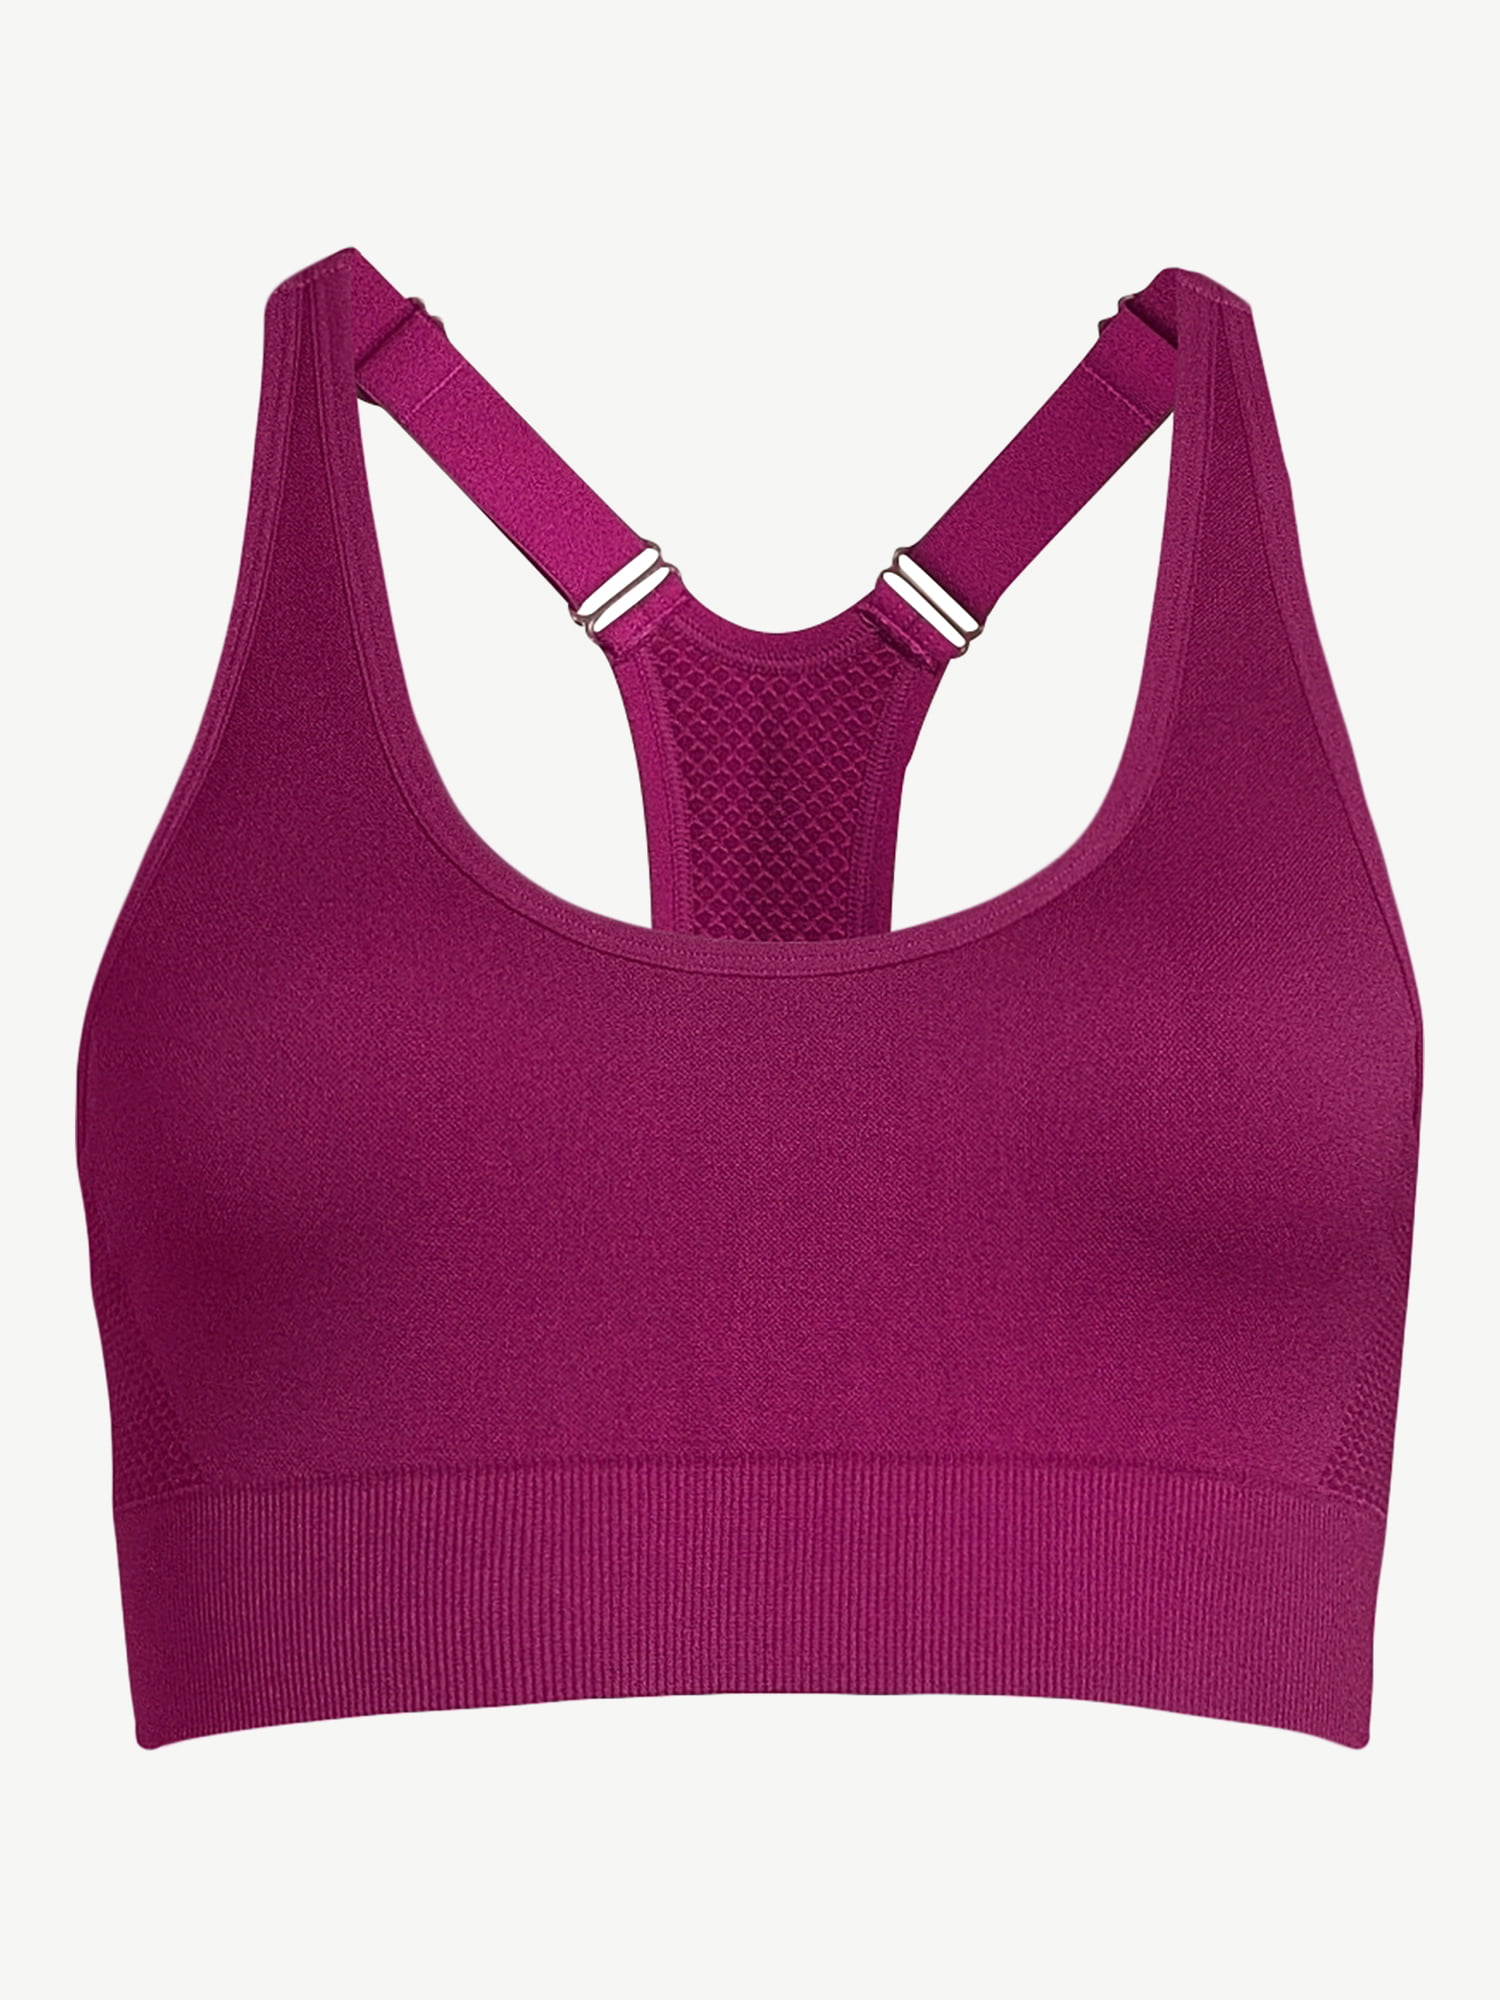 New Love & Sports Seamless Sports Bra adds trendy Hot Pink color size Large  NWT 